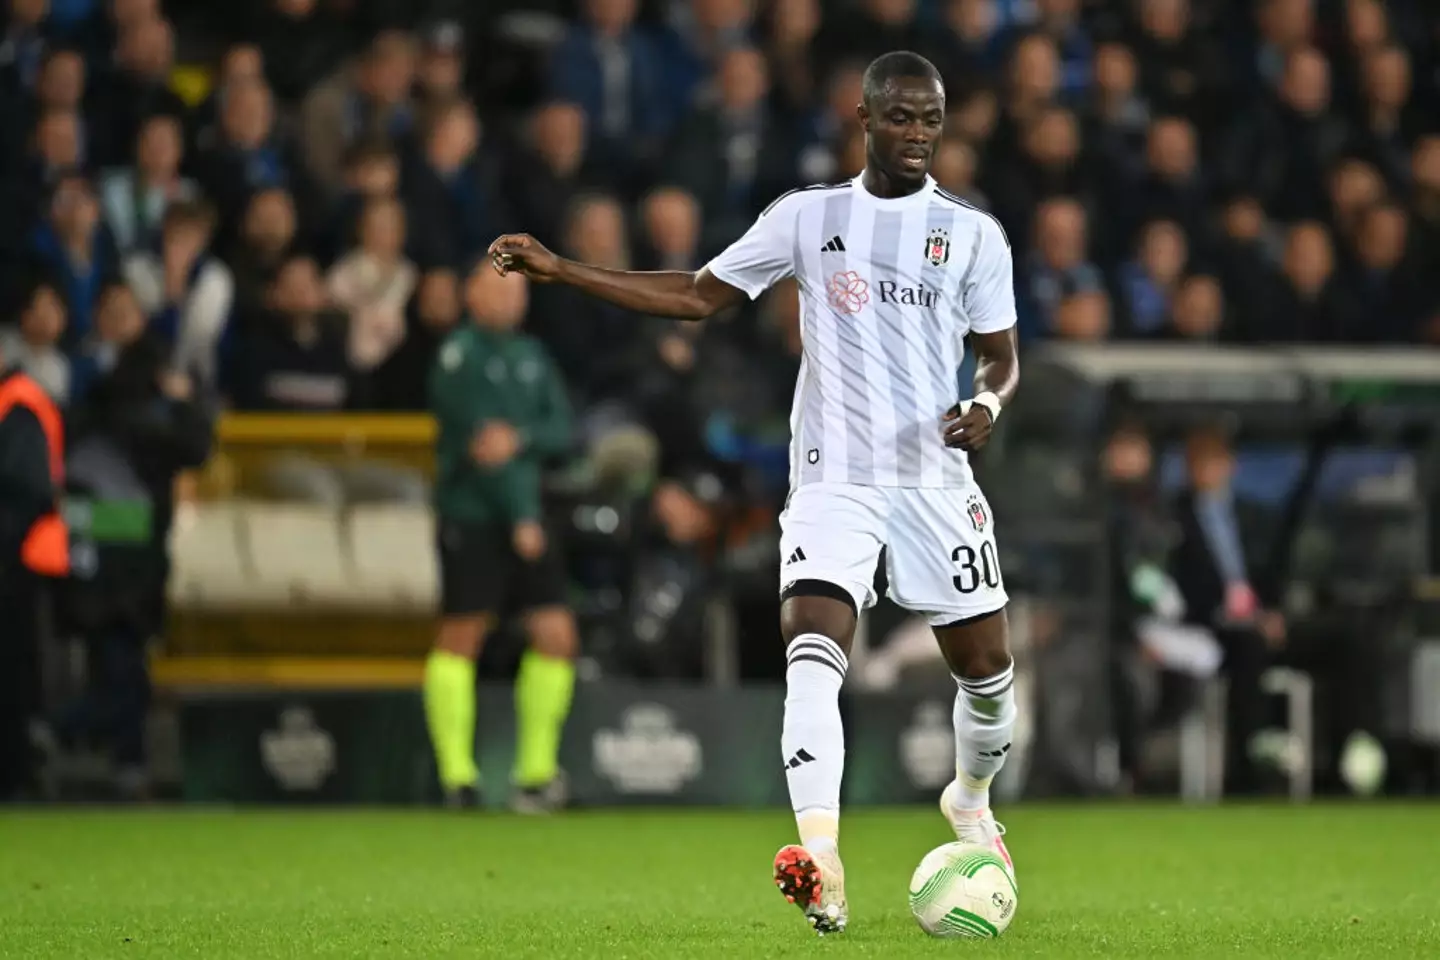 Bailly managed just eight appearances for Besiktas (Image: Getty)